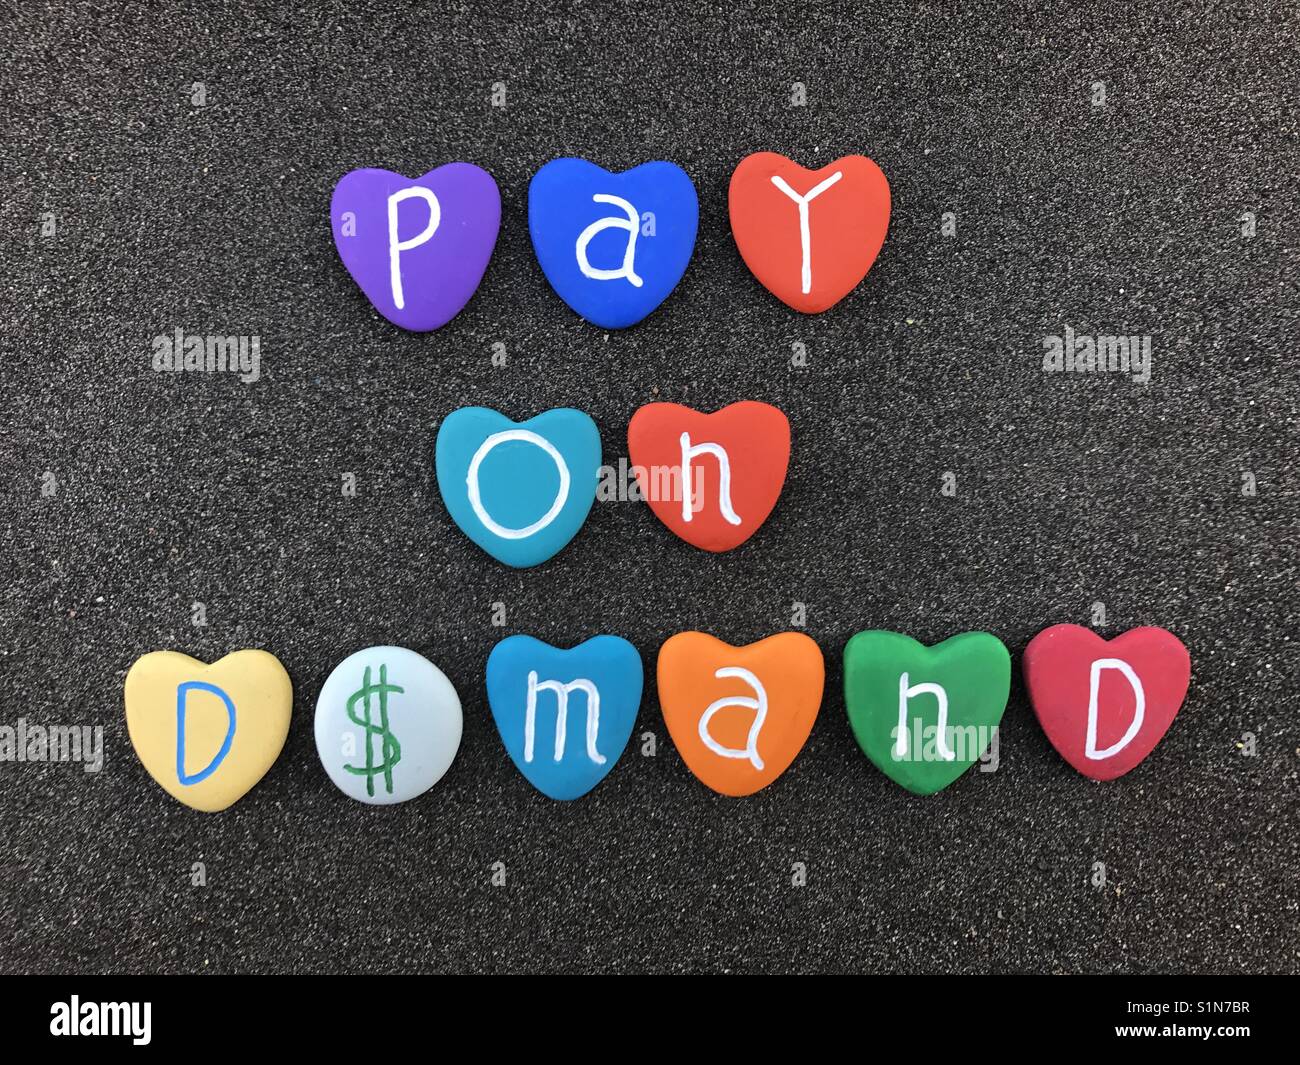 Pay on demand with us dollar symbol Stock Photo